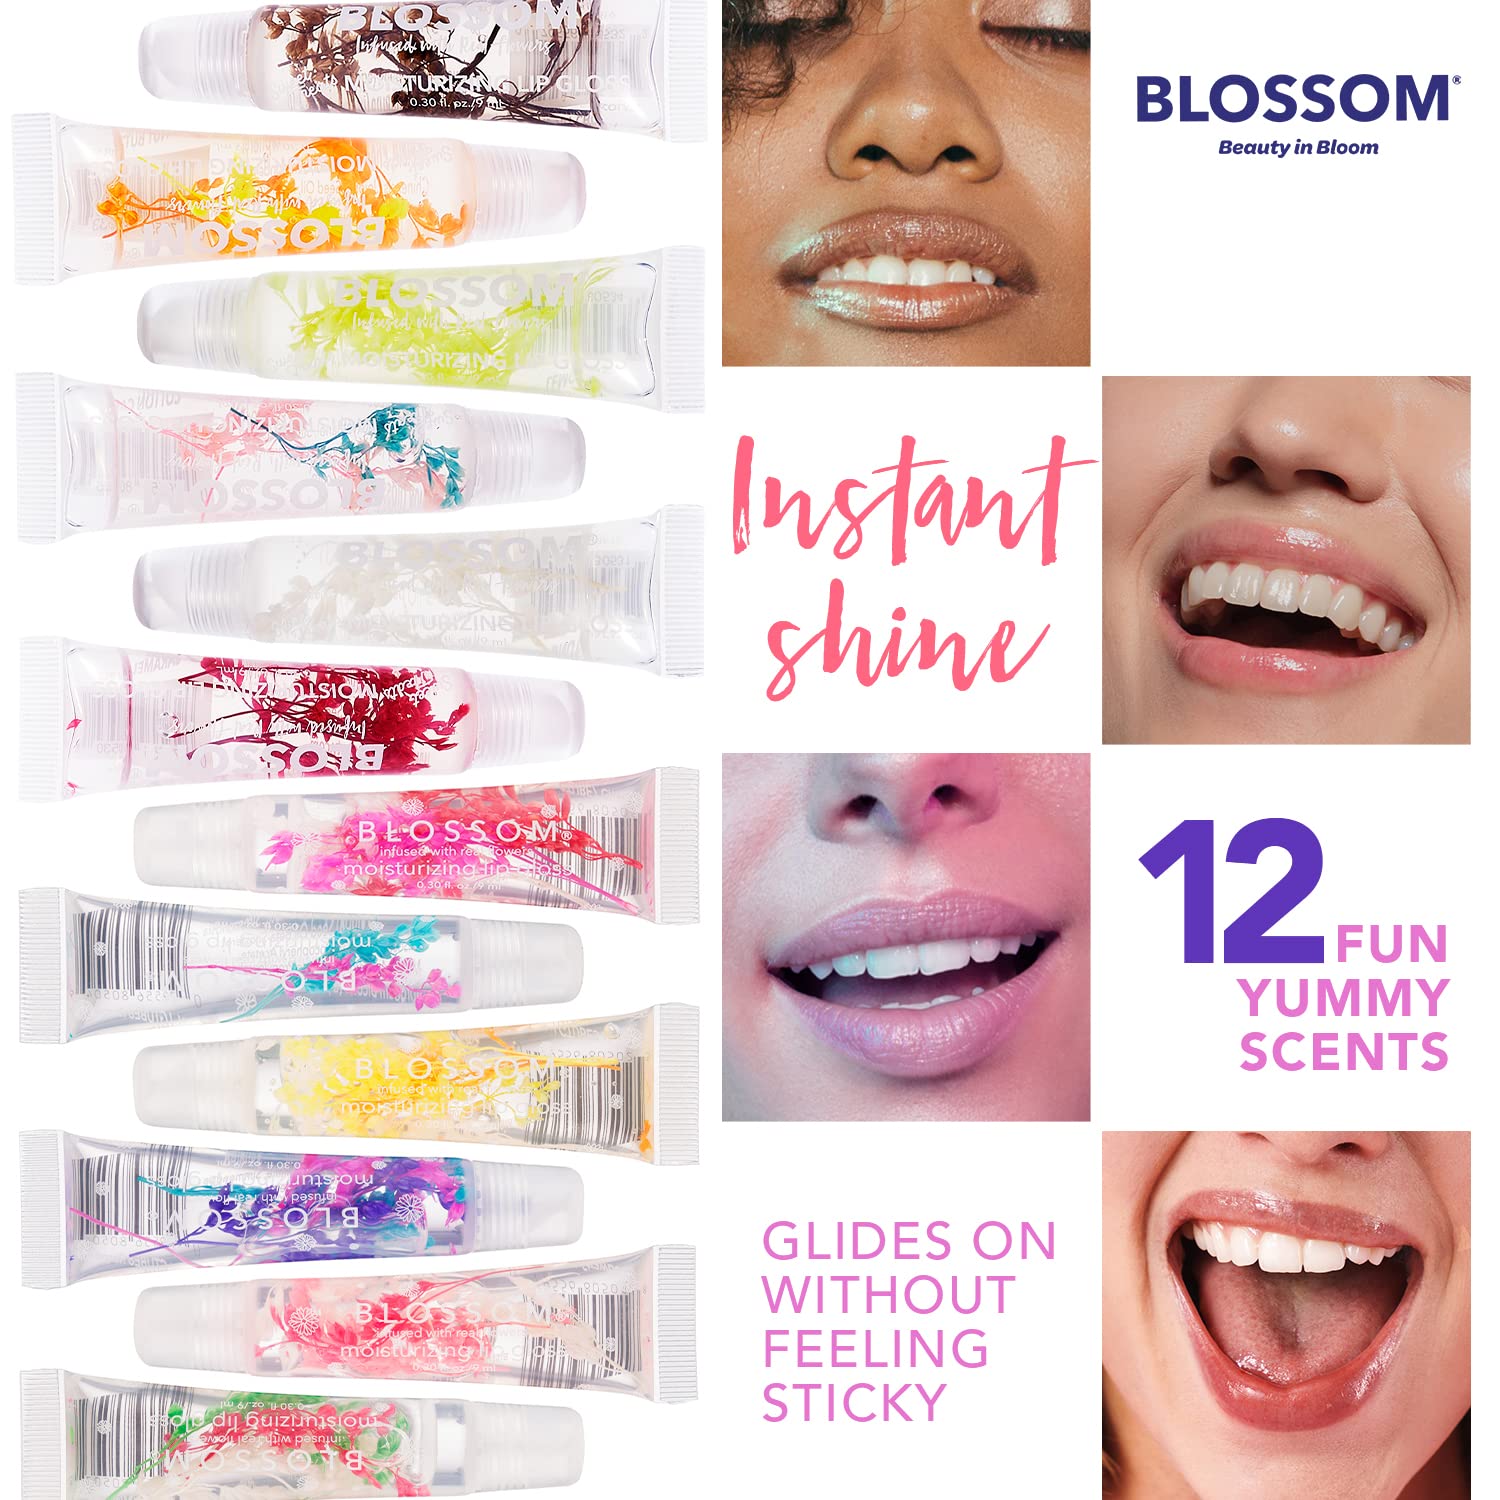 Blossom Scented Moisturizing Lip Gloss Tubes, Infused with Real Flowers, 0.9 fl. oz/27ml, 3 pack Gift Set, Strawberry/Raspberry/Mango